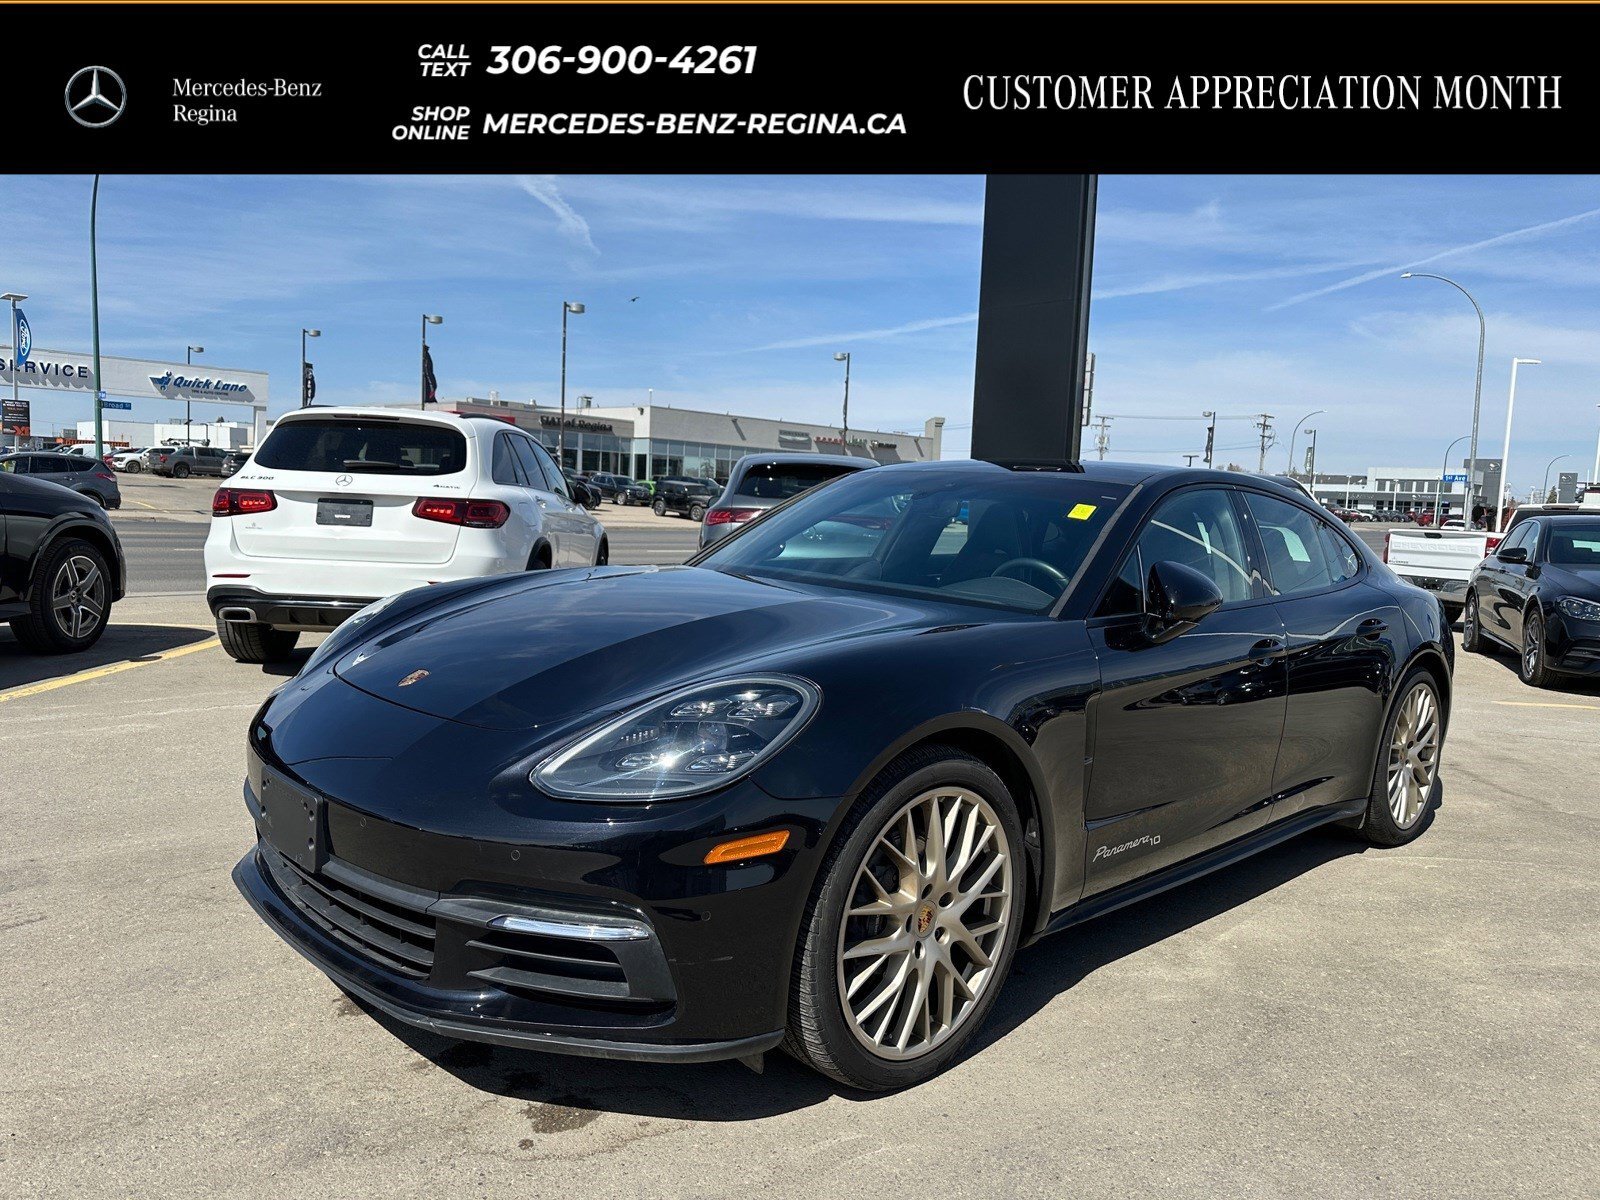 2020 Porsche Panamera 4 10 Years Edition , Heated/Vented Seats, Lane Kee